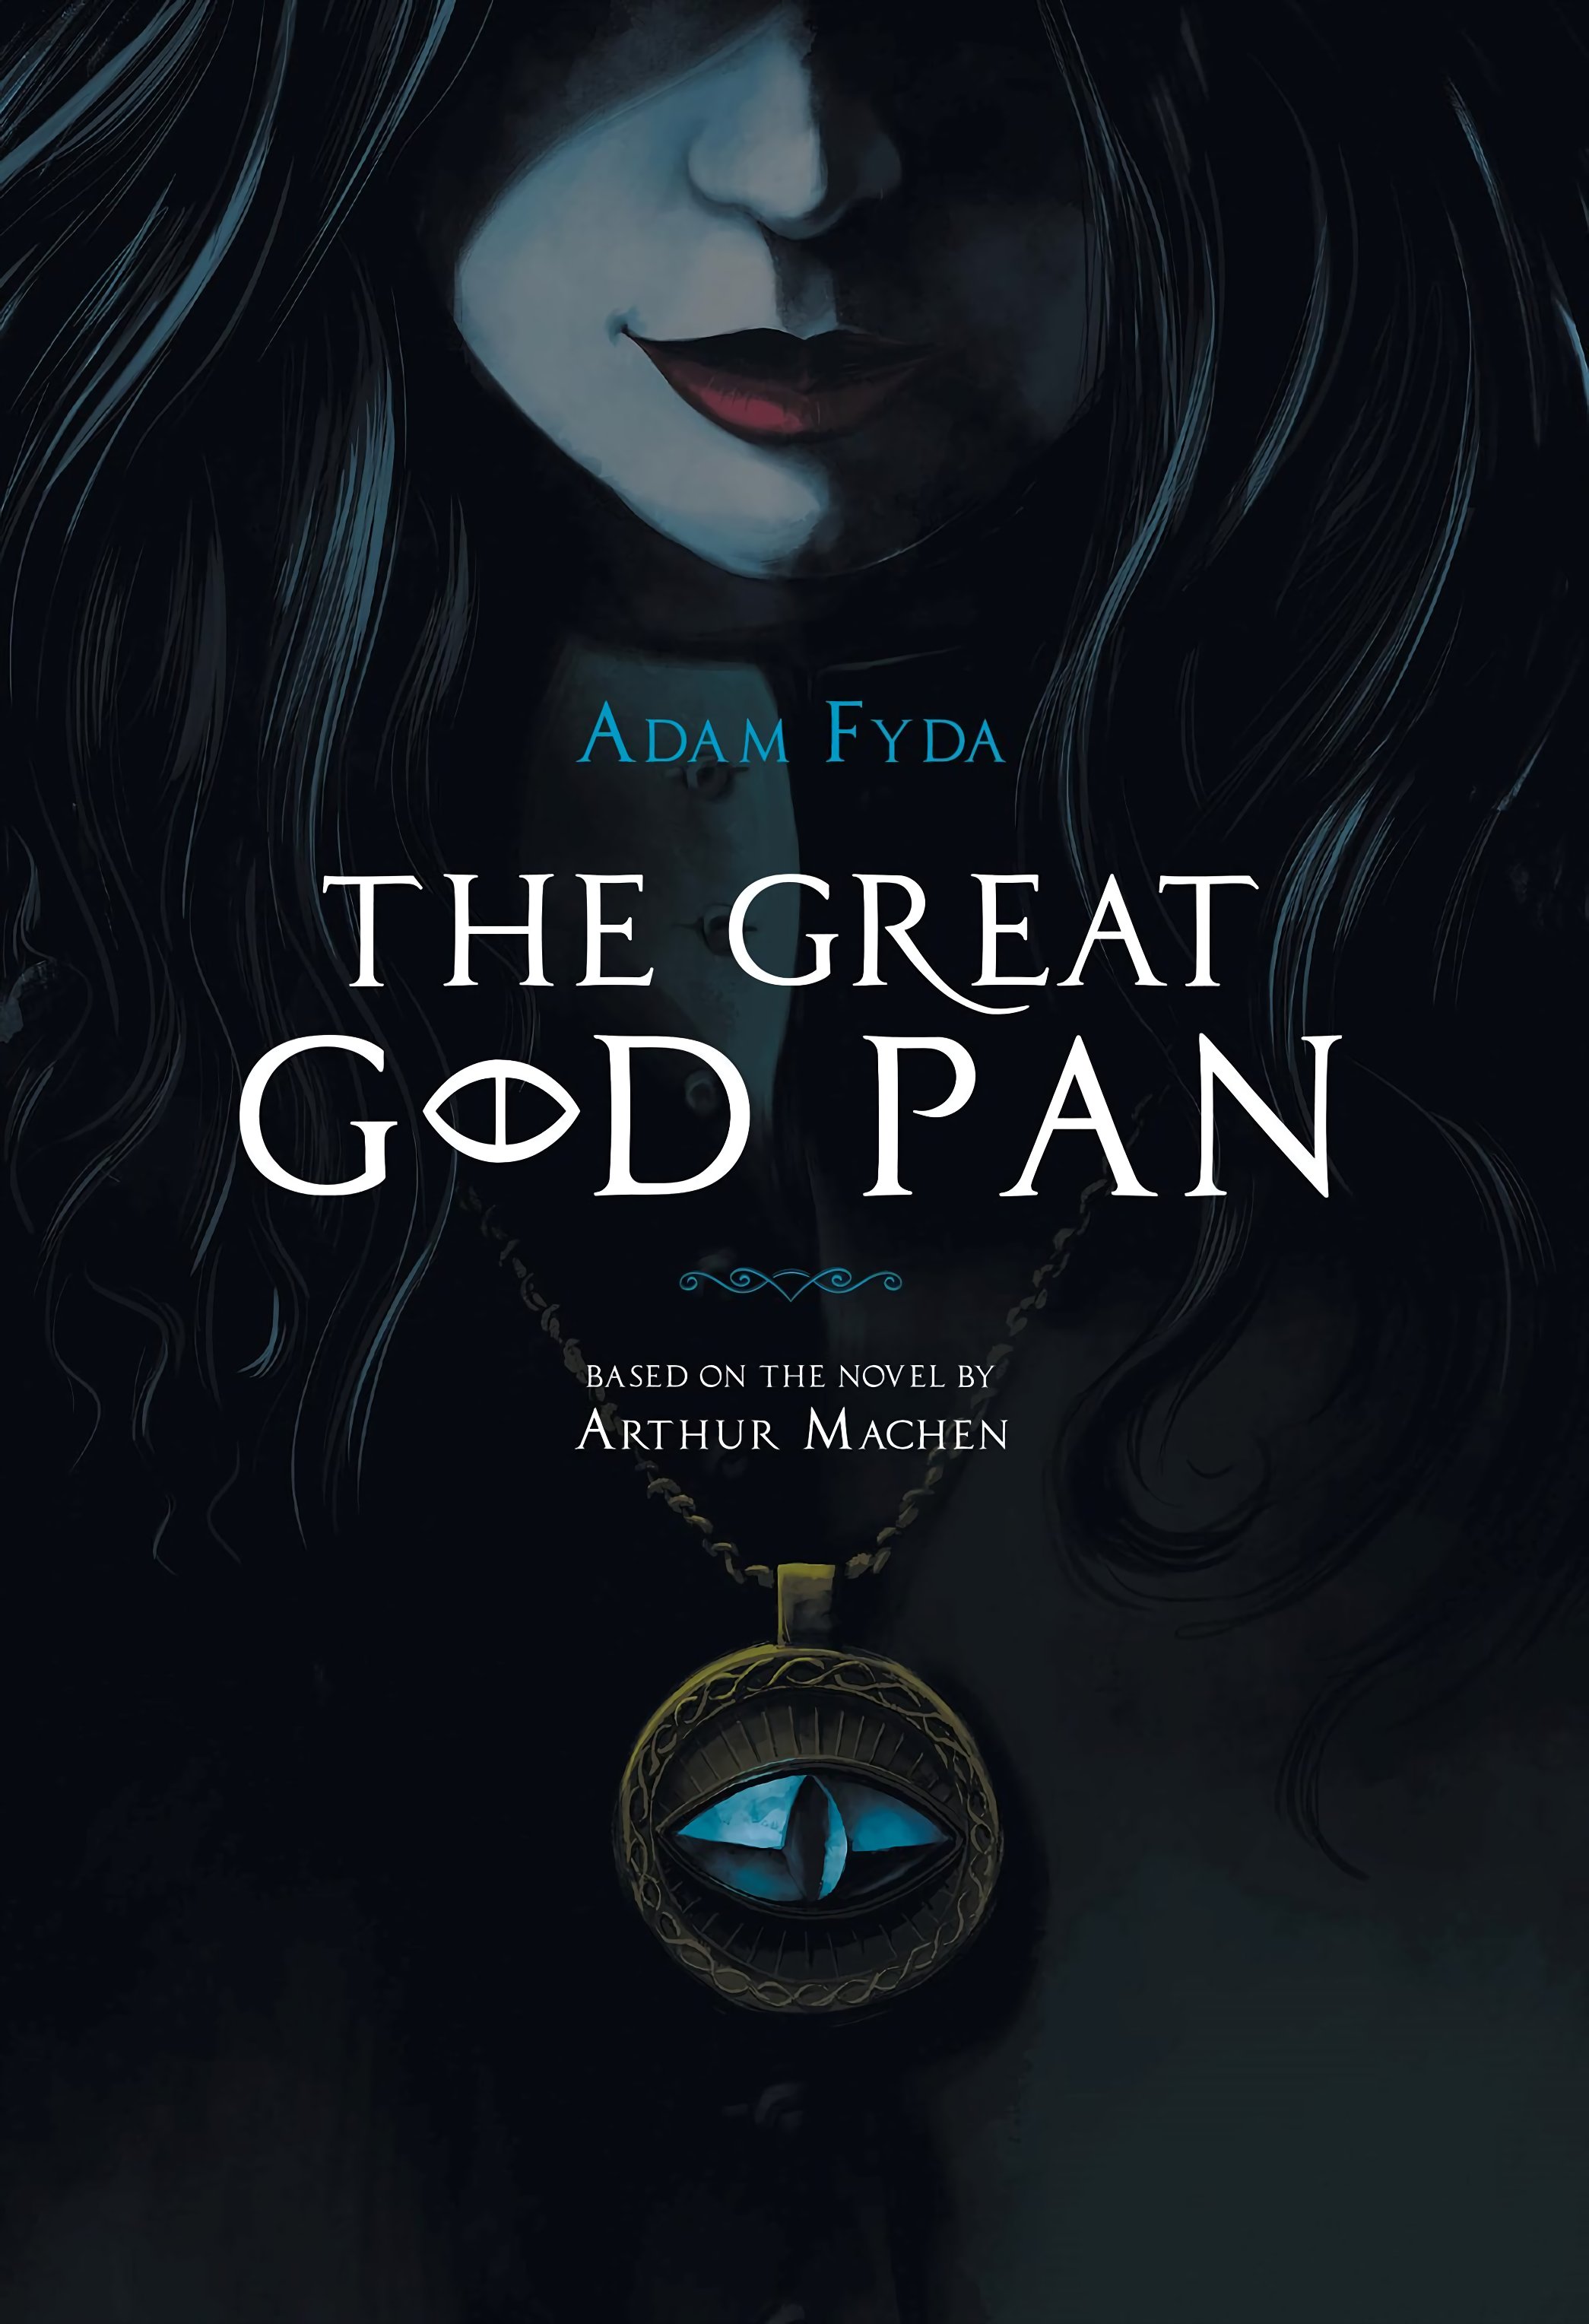 Read online The Great God Pan comic -  Issue # TPB - 2